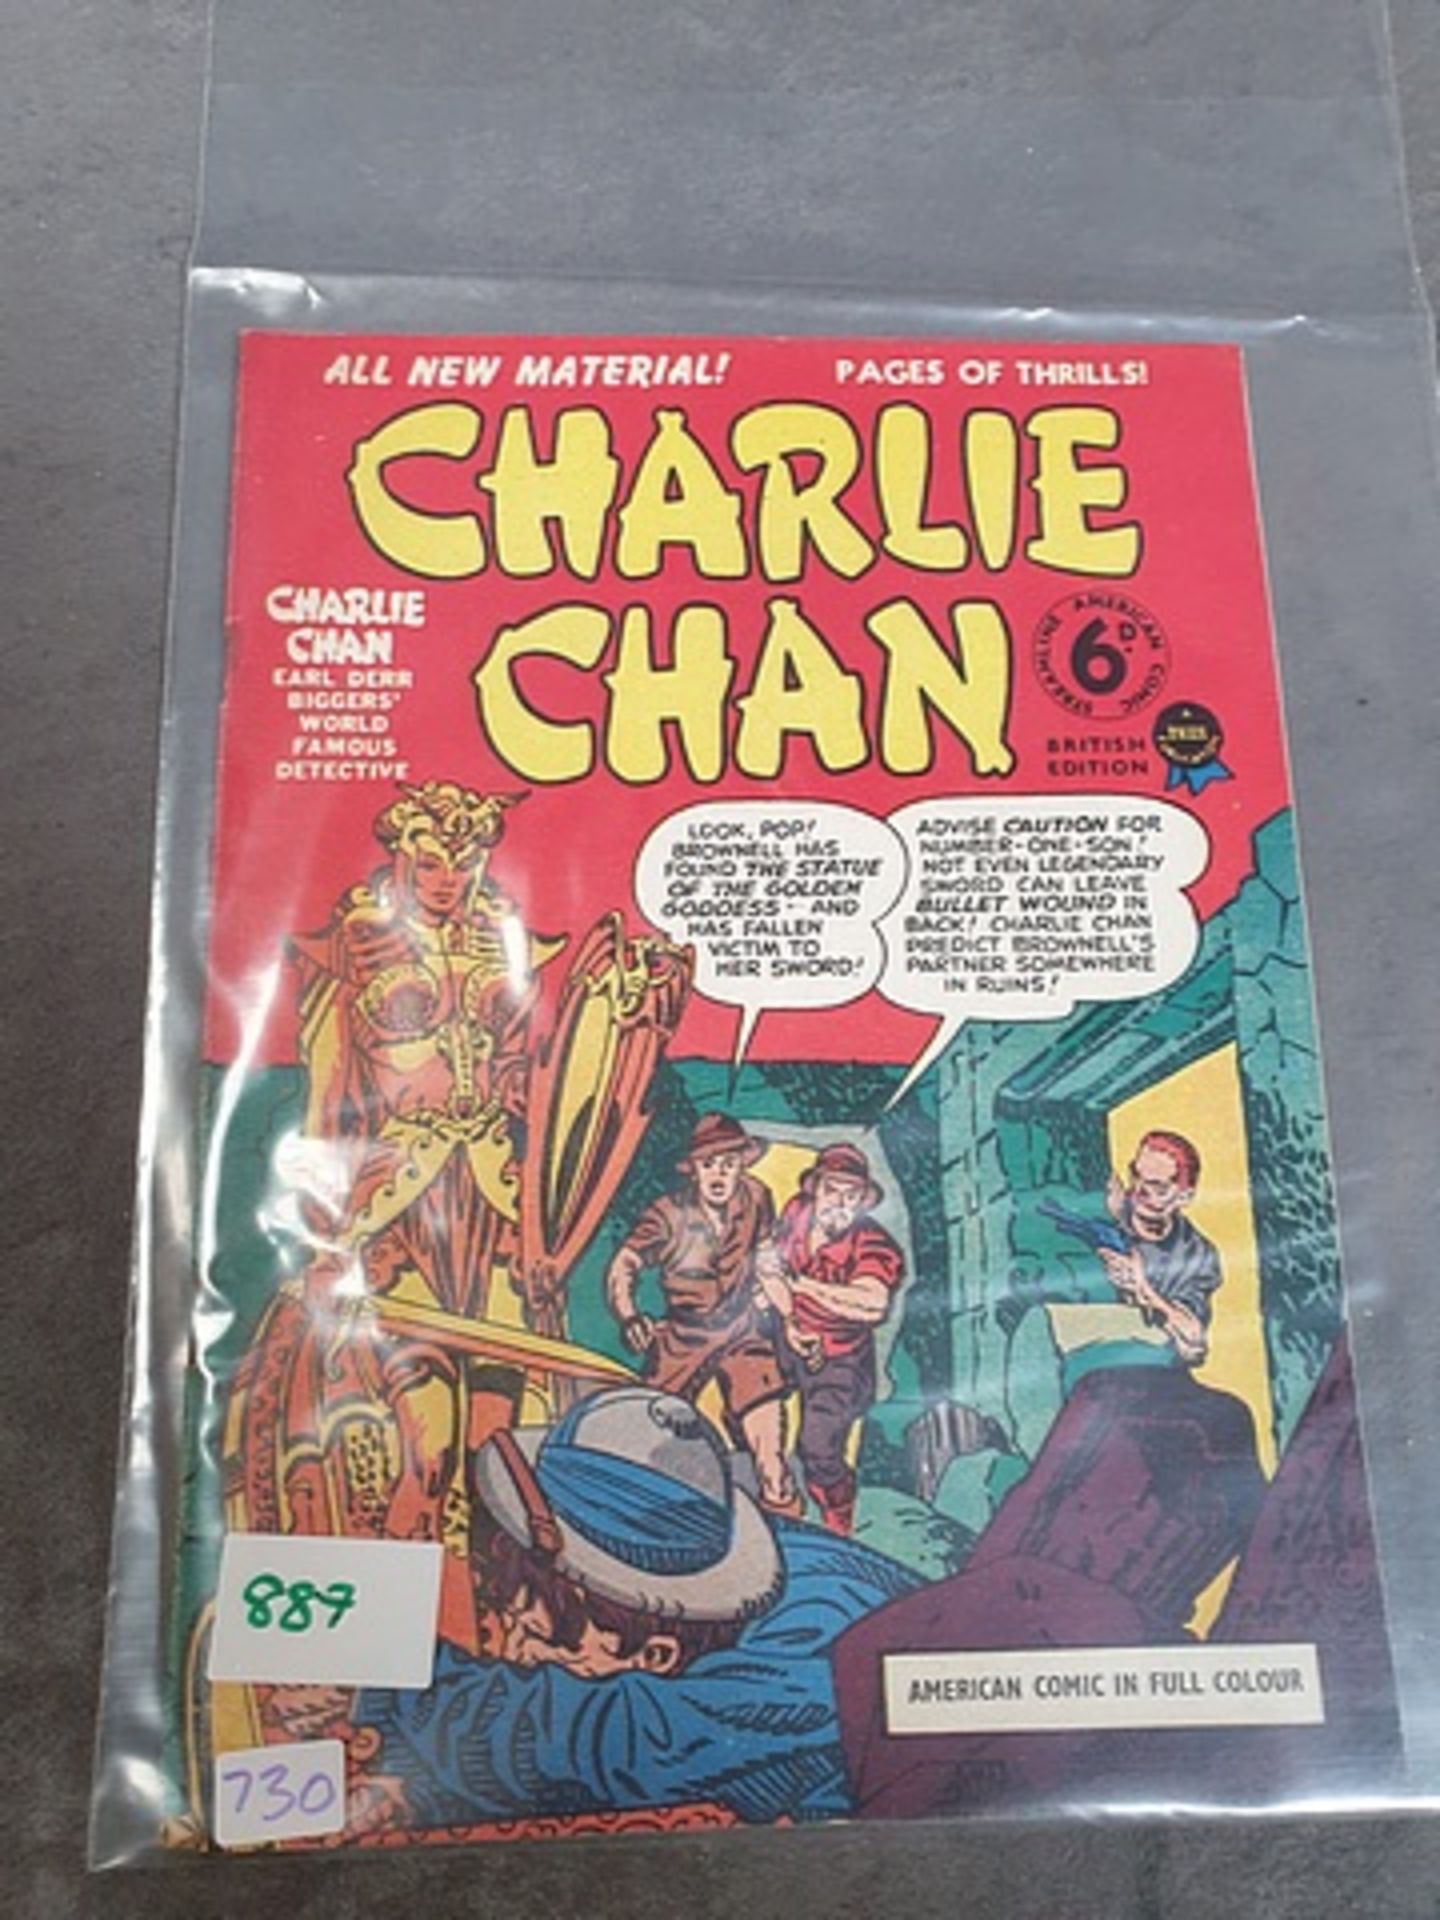 Streamline 1950 Series Charlie Chan #1 The Case Of The Missing Planet (1950)